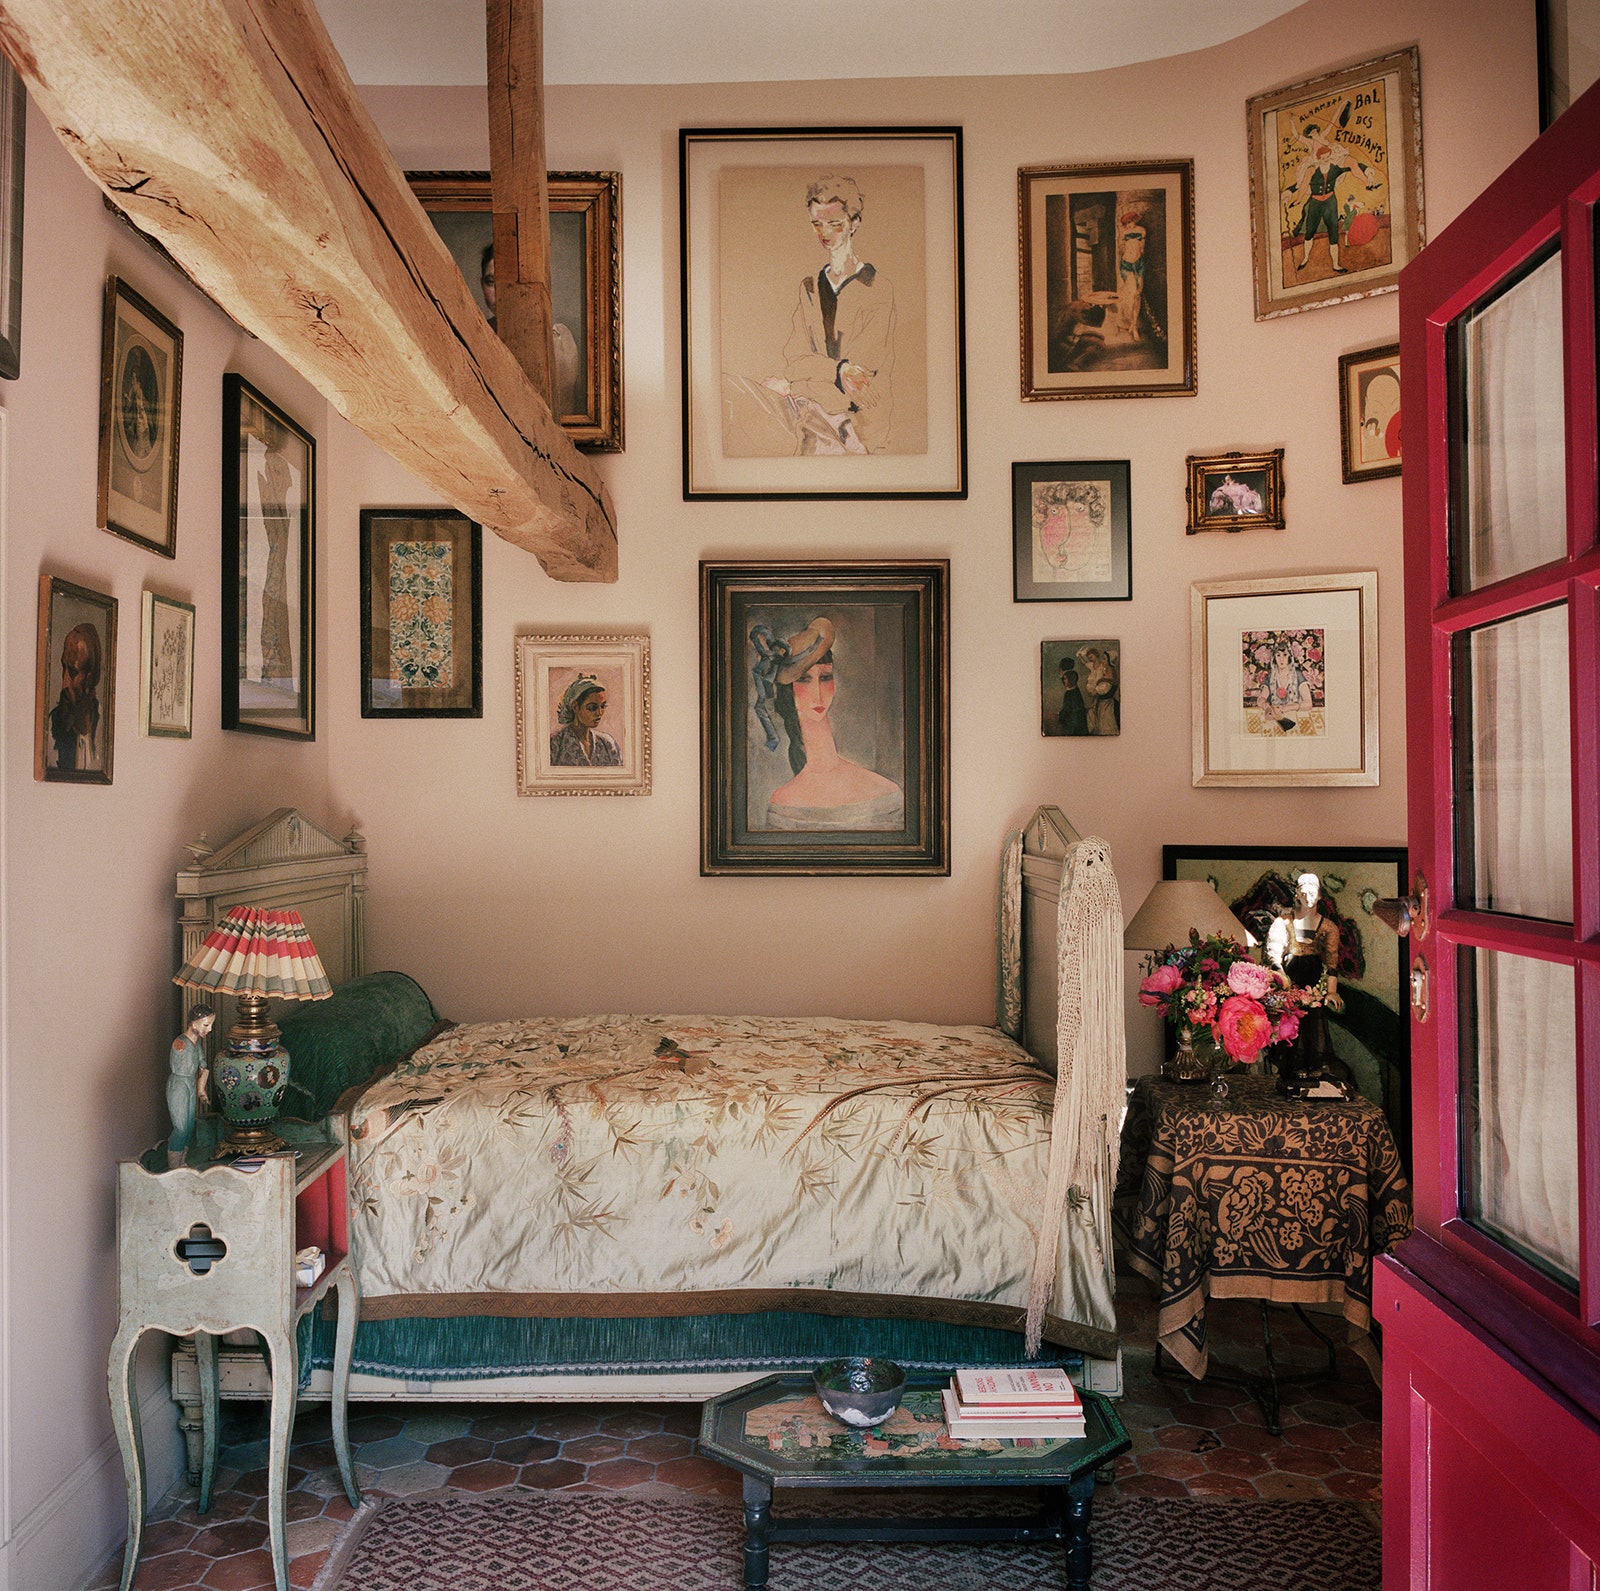 Décor Inspiration: John Galliano’s Country Home in Gerberoy, Northern France